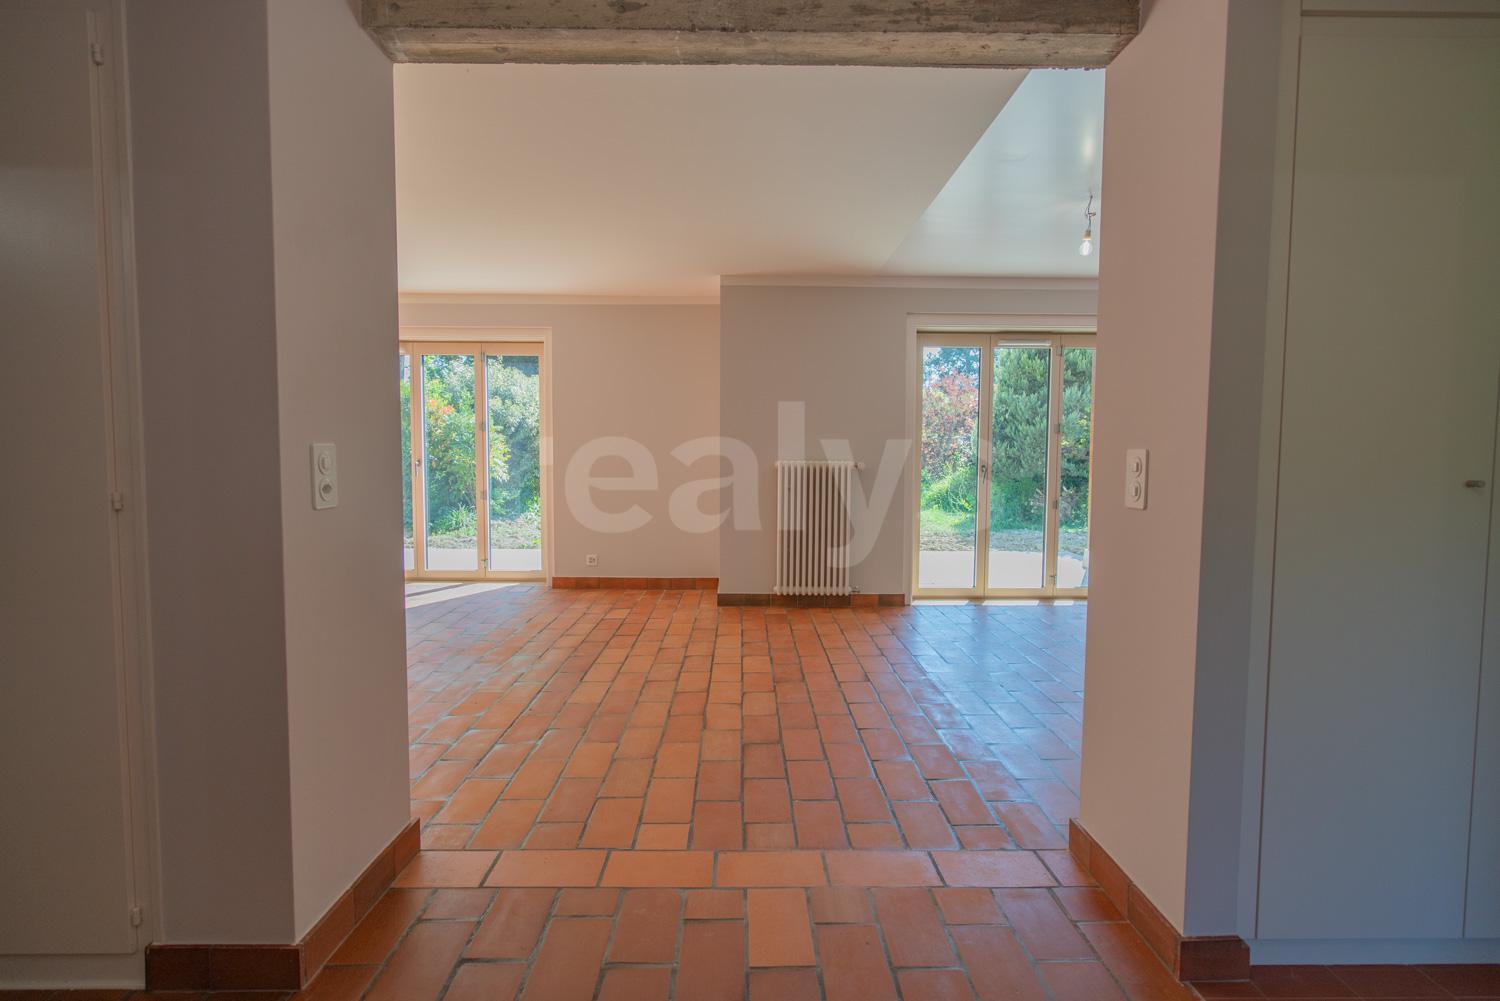 PrivaliaBeautiful new flat with garden